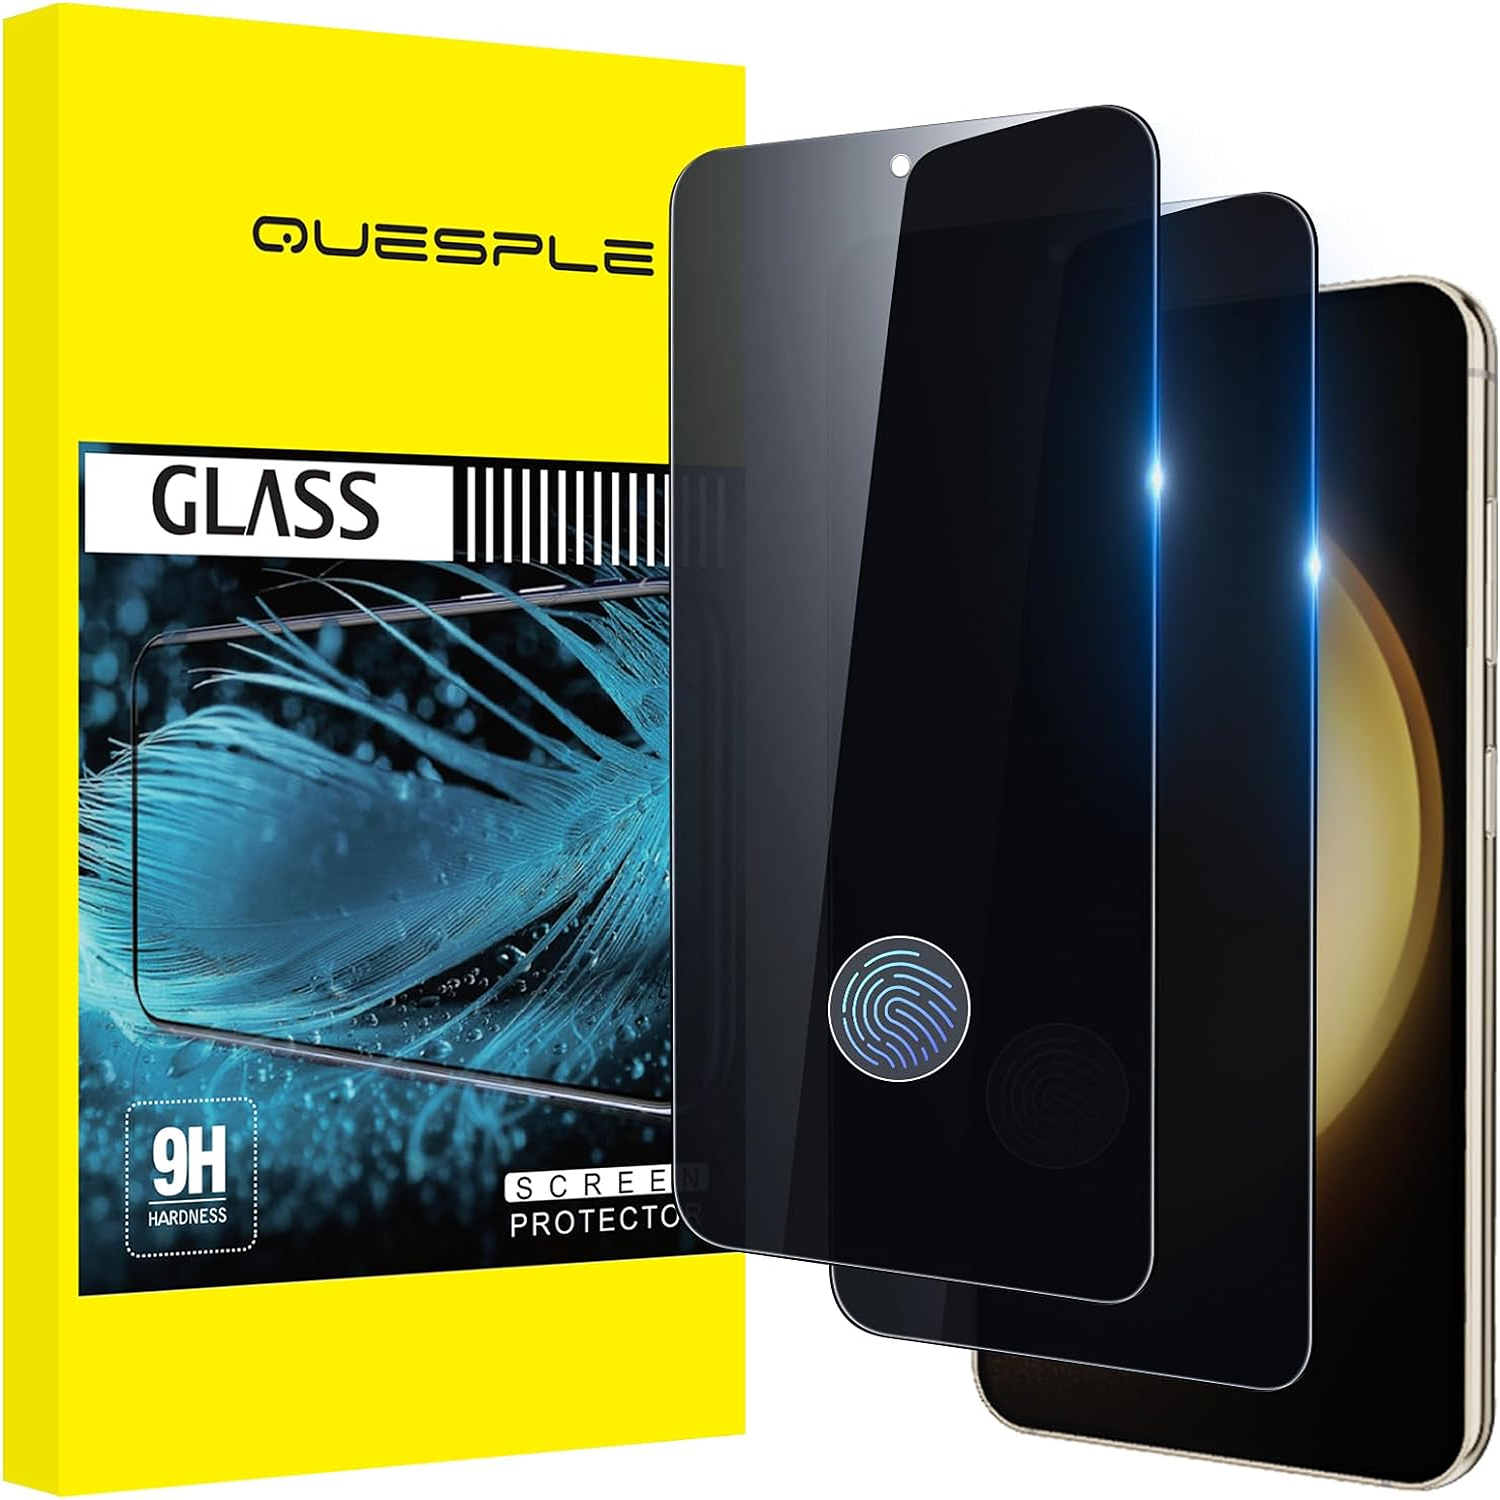 Galaxy S23 Ultra Screen Protector Mobile Accessories - EF-US918CTEGUS